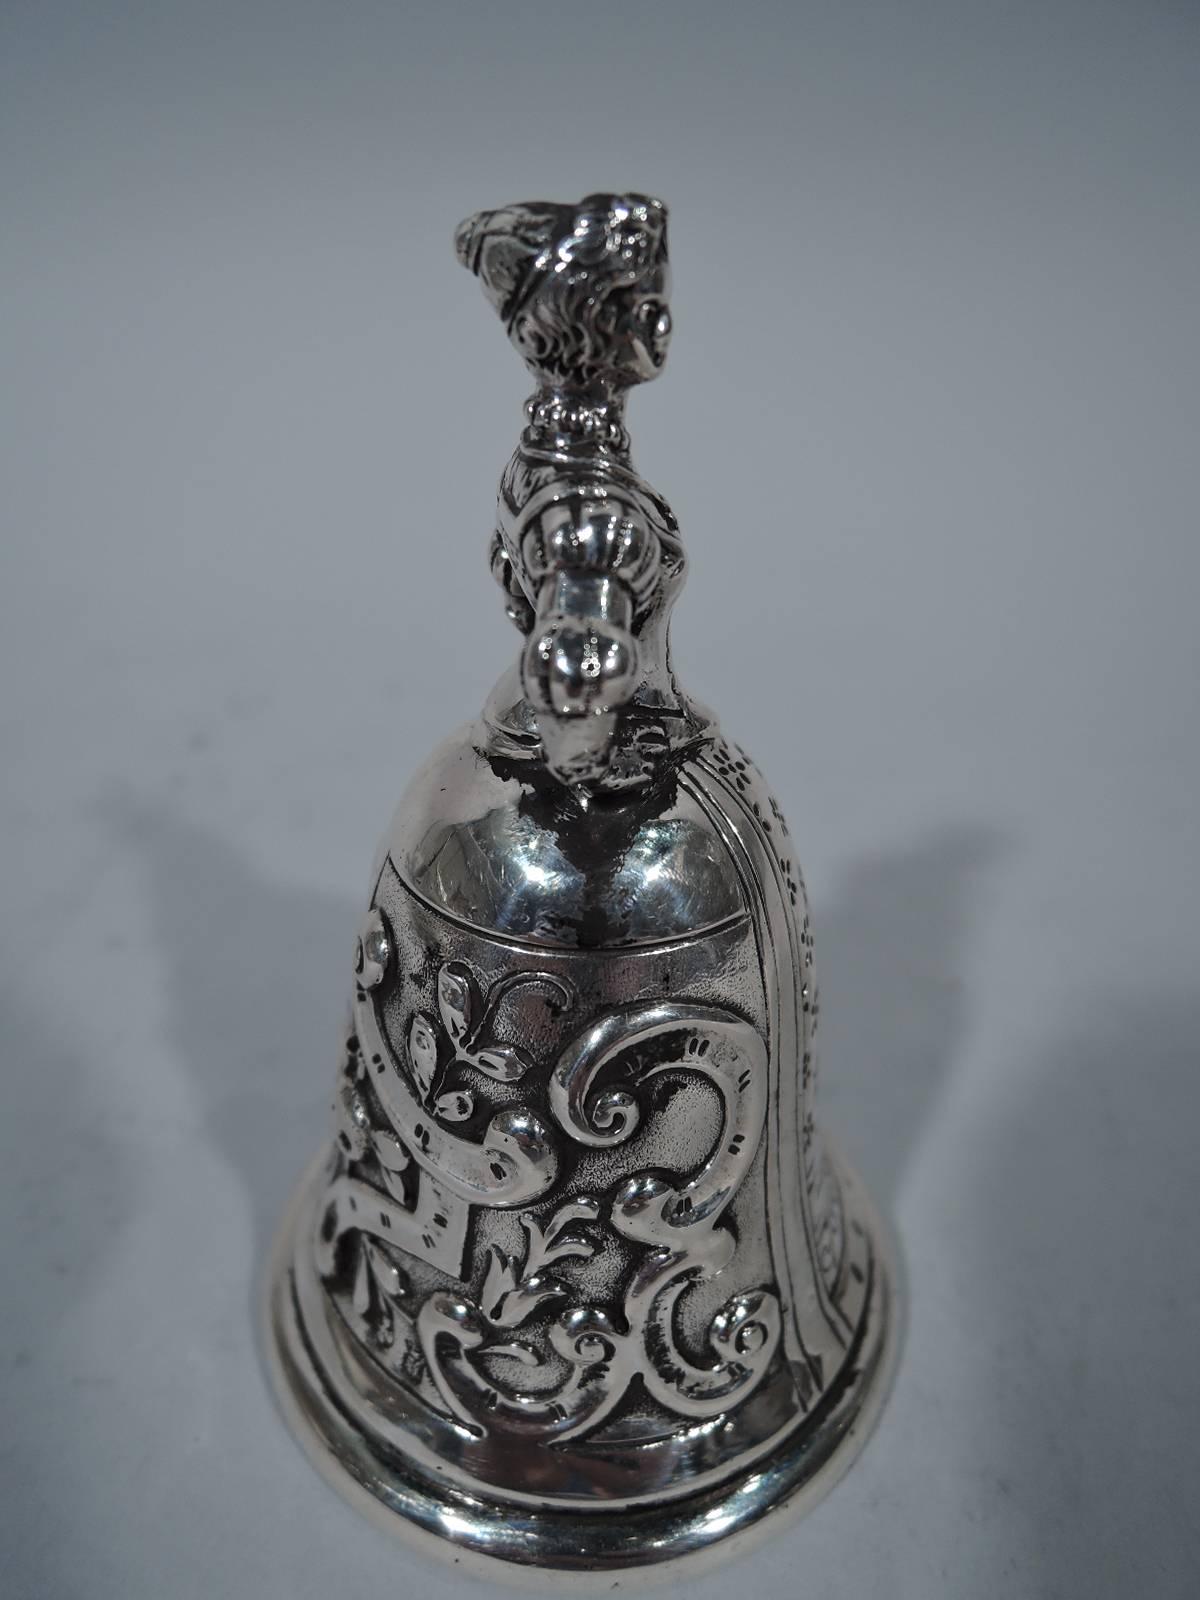 Antique European silver dinner bell. Handle in form of hands-on-hips woman in Renaissance dress with skirt-form bowl decorated with flowers and scrolls. This buxom maid is sure to bring everyone to the table. Unmarked. Weight: 2.6 troy ounces.